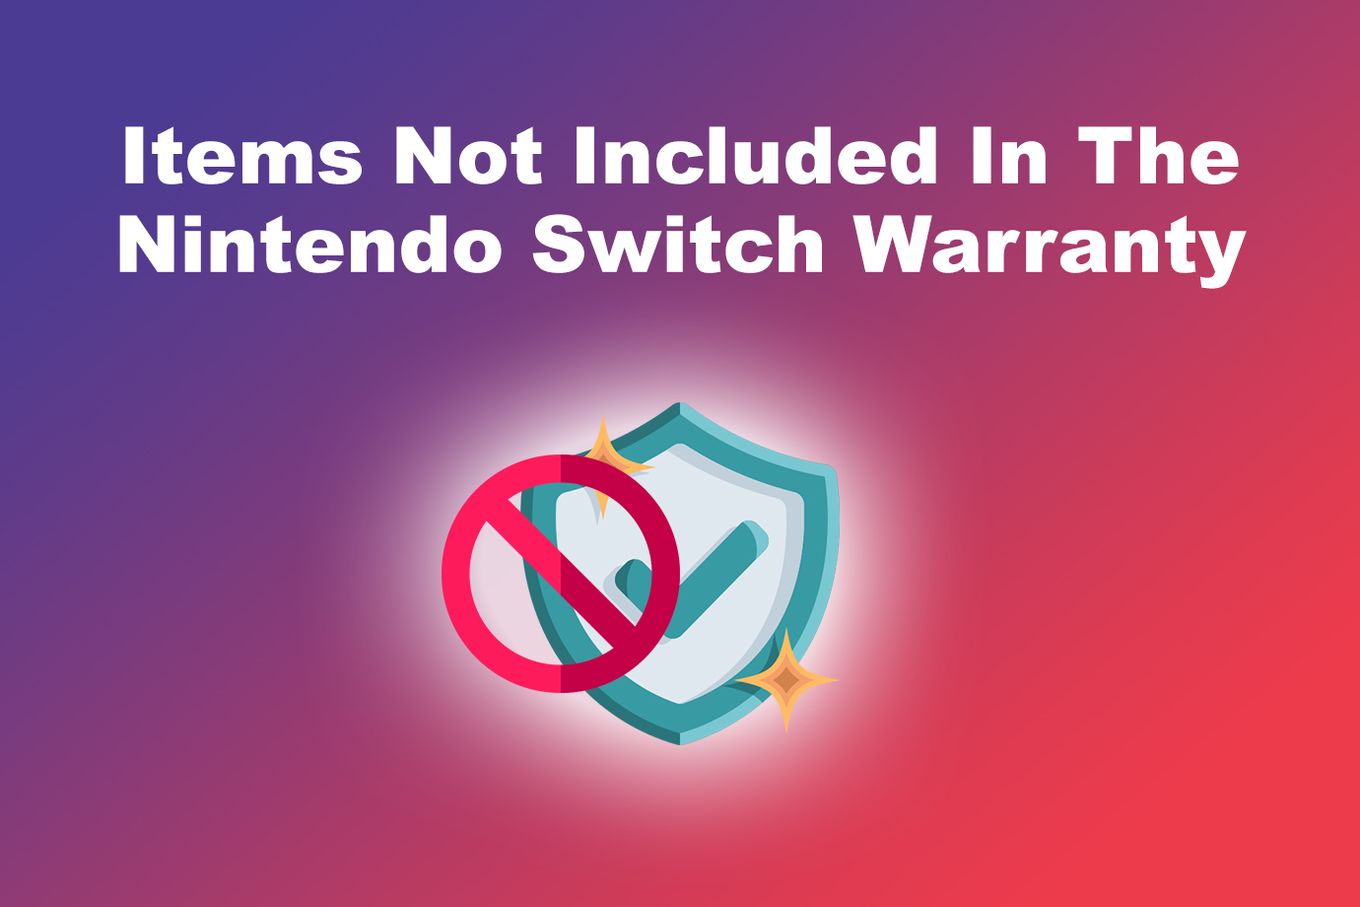 Items Not Included In The Nintendo Switch Warranty